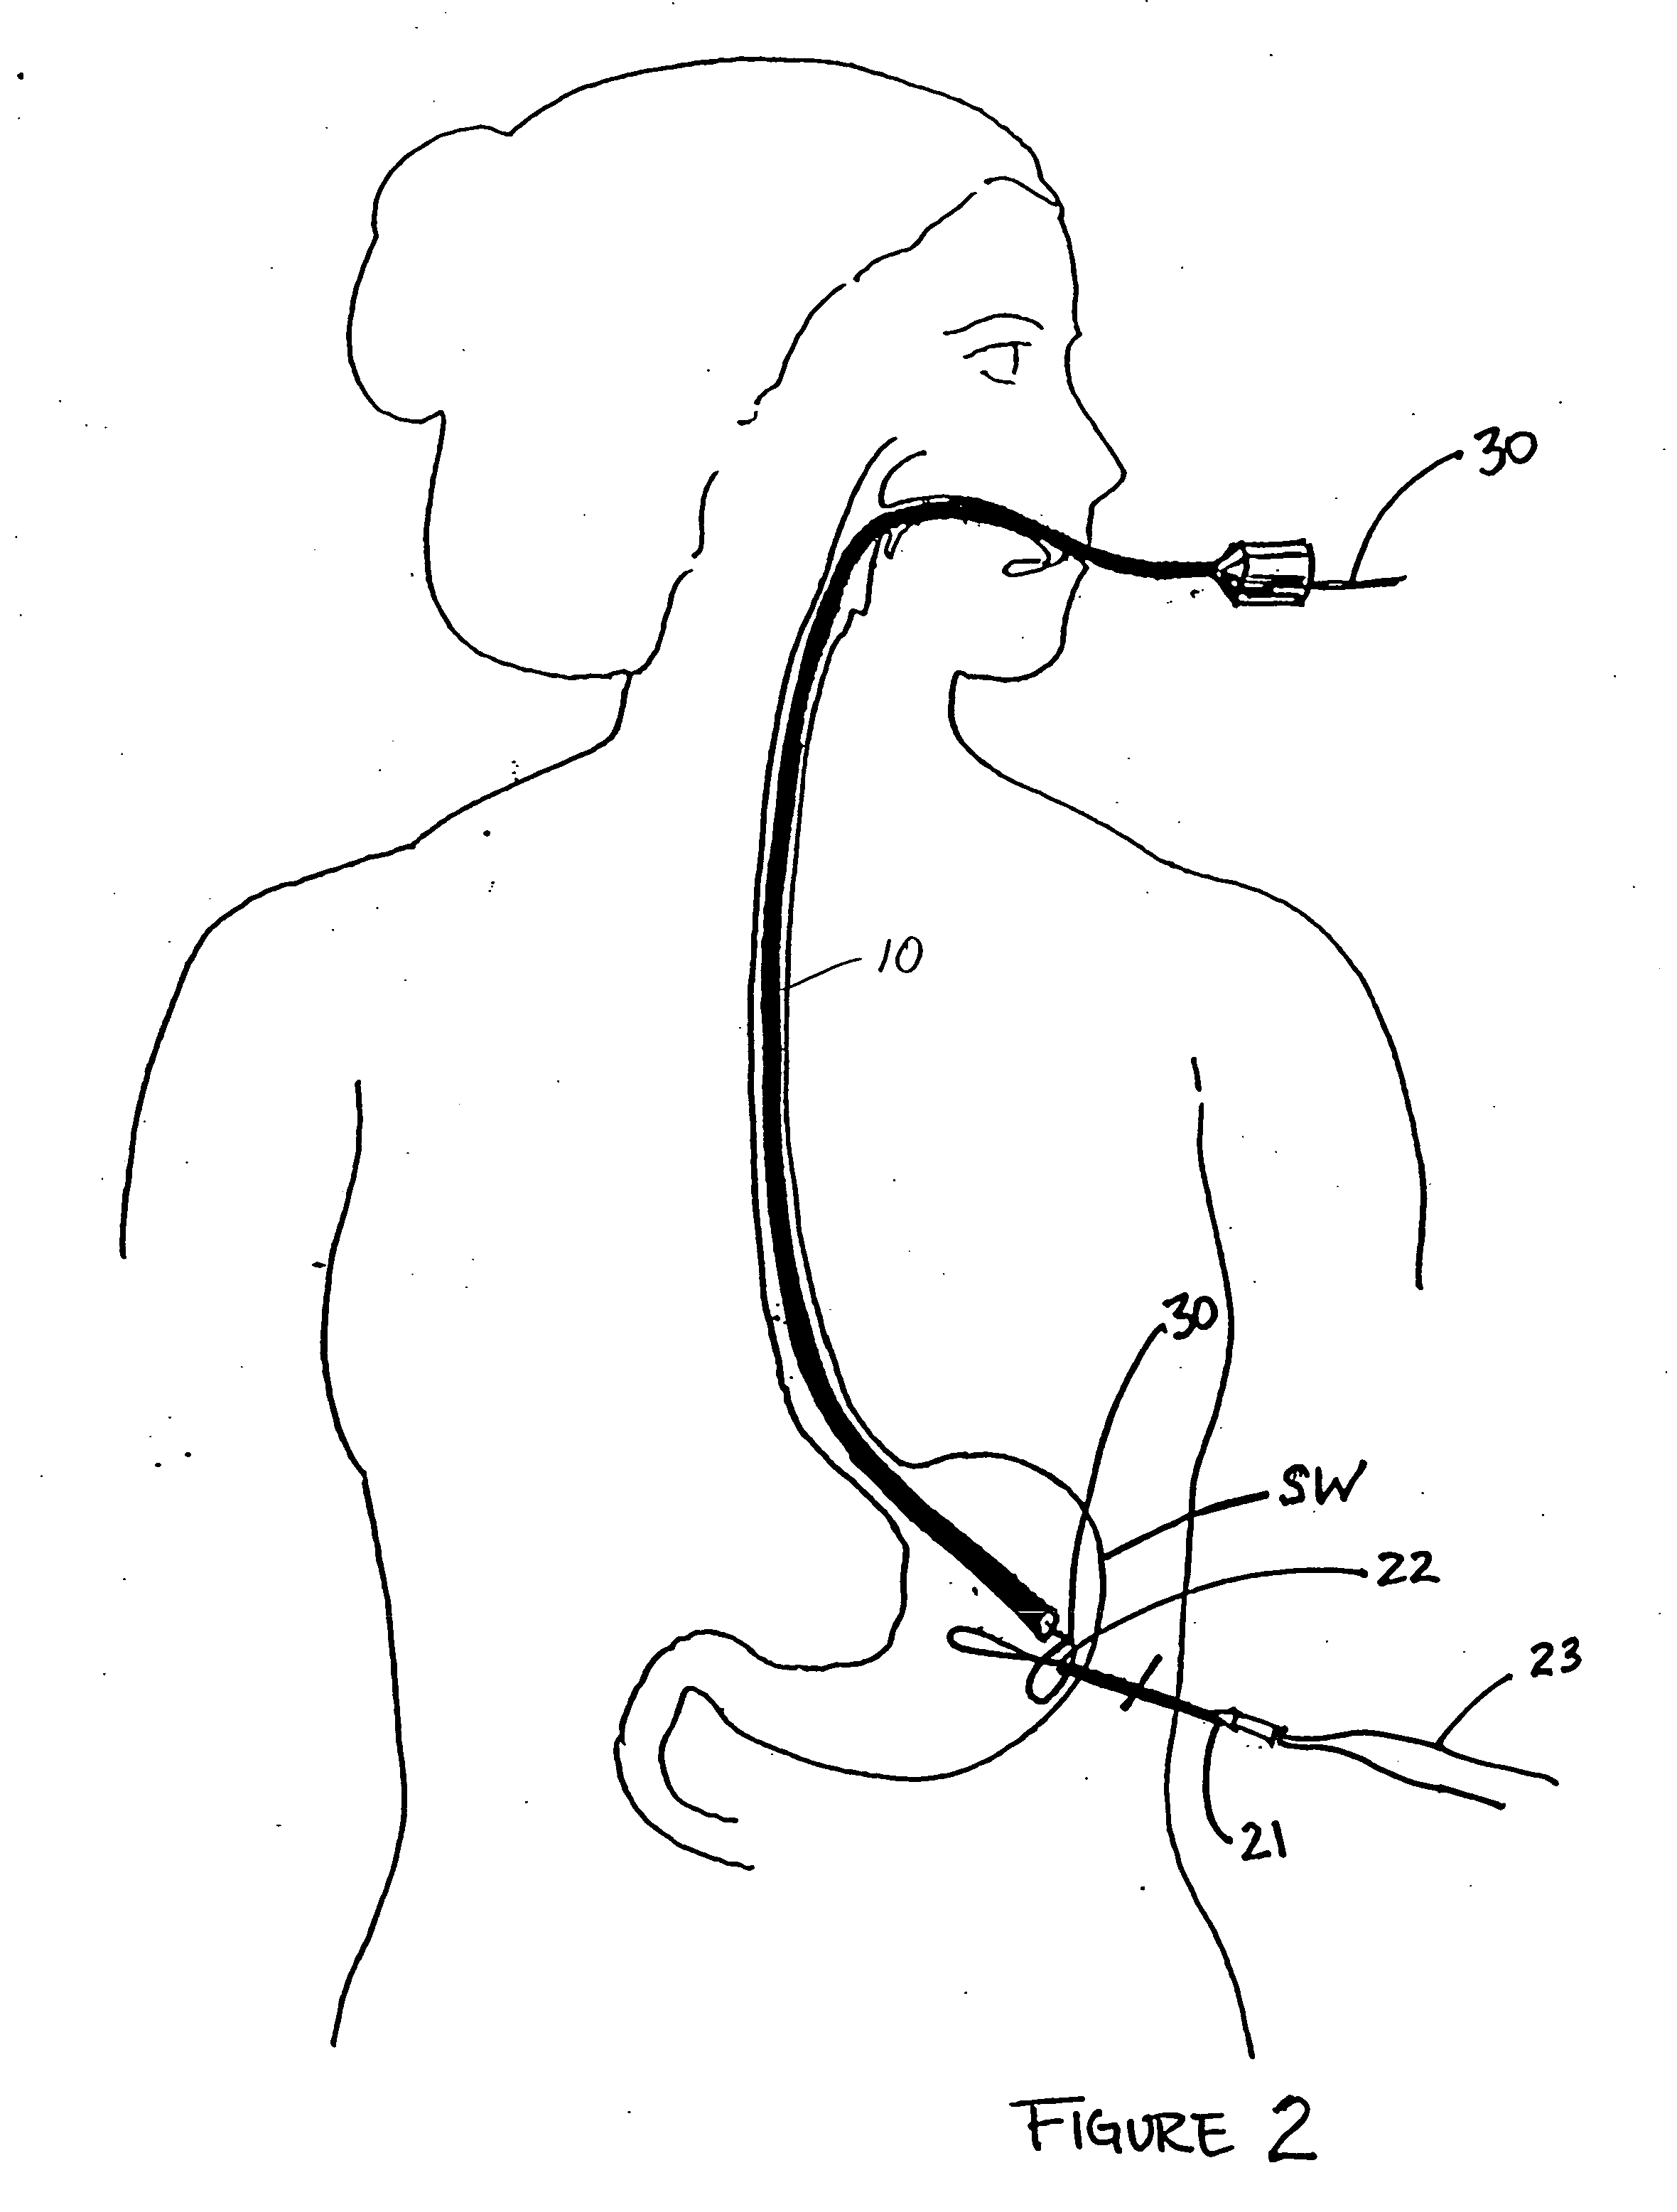 Method and device for use in minimally invasive placement of intragastric devices